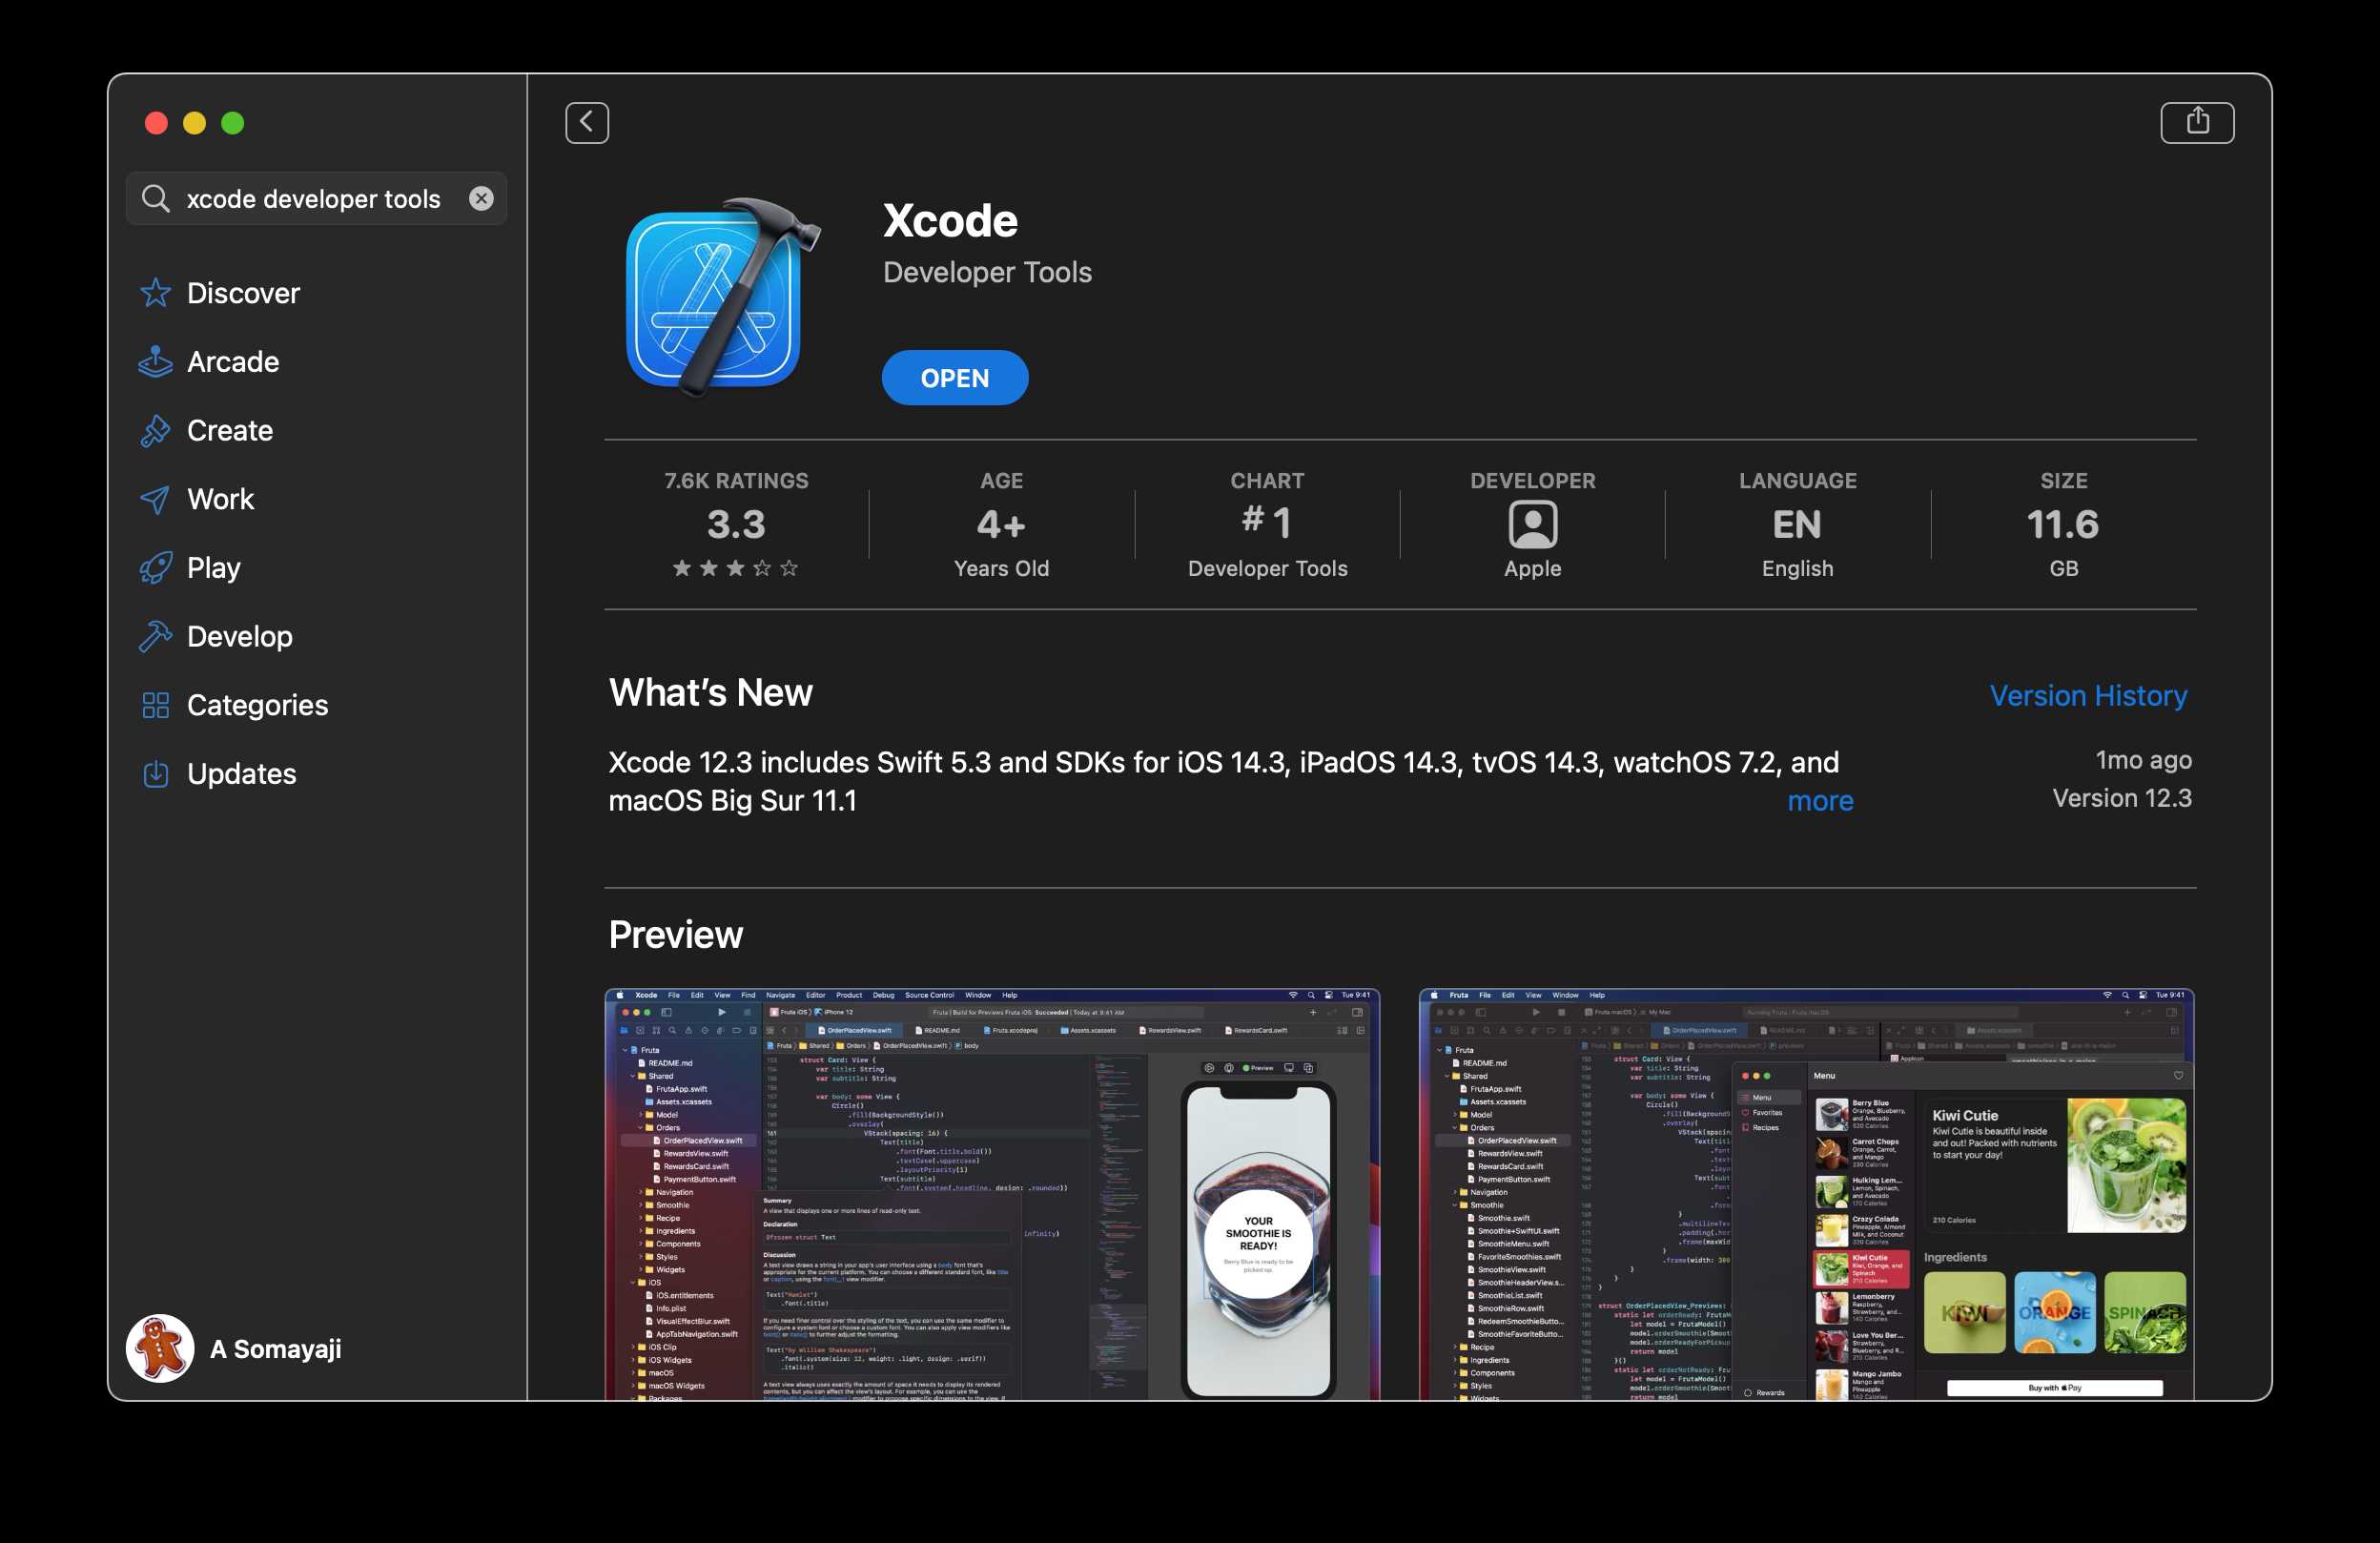 Xcode install from the Mac App Store